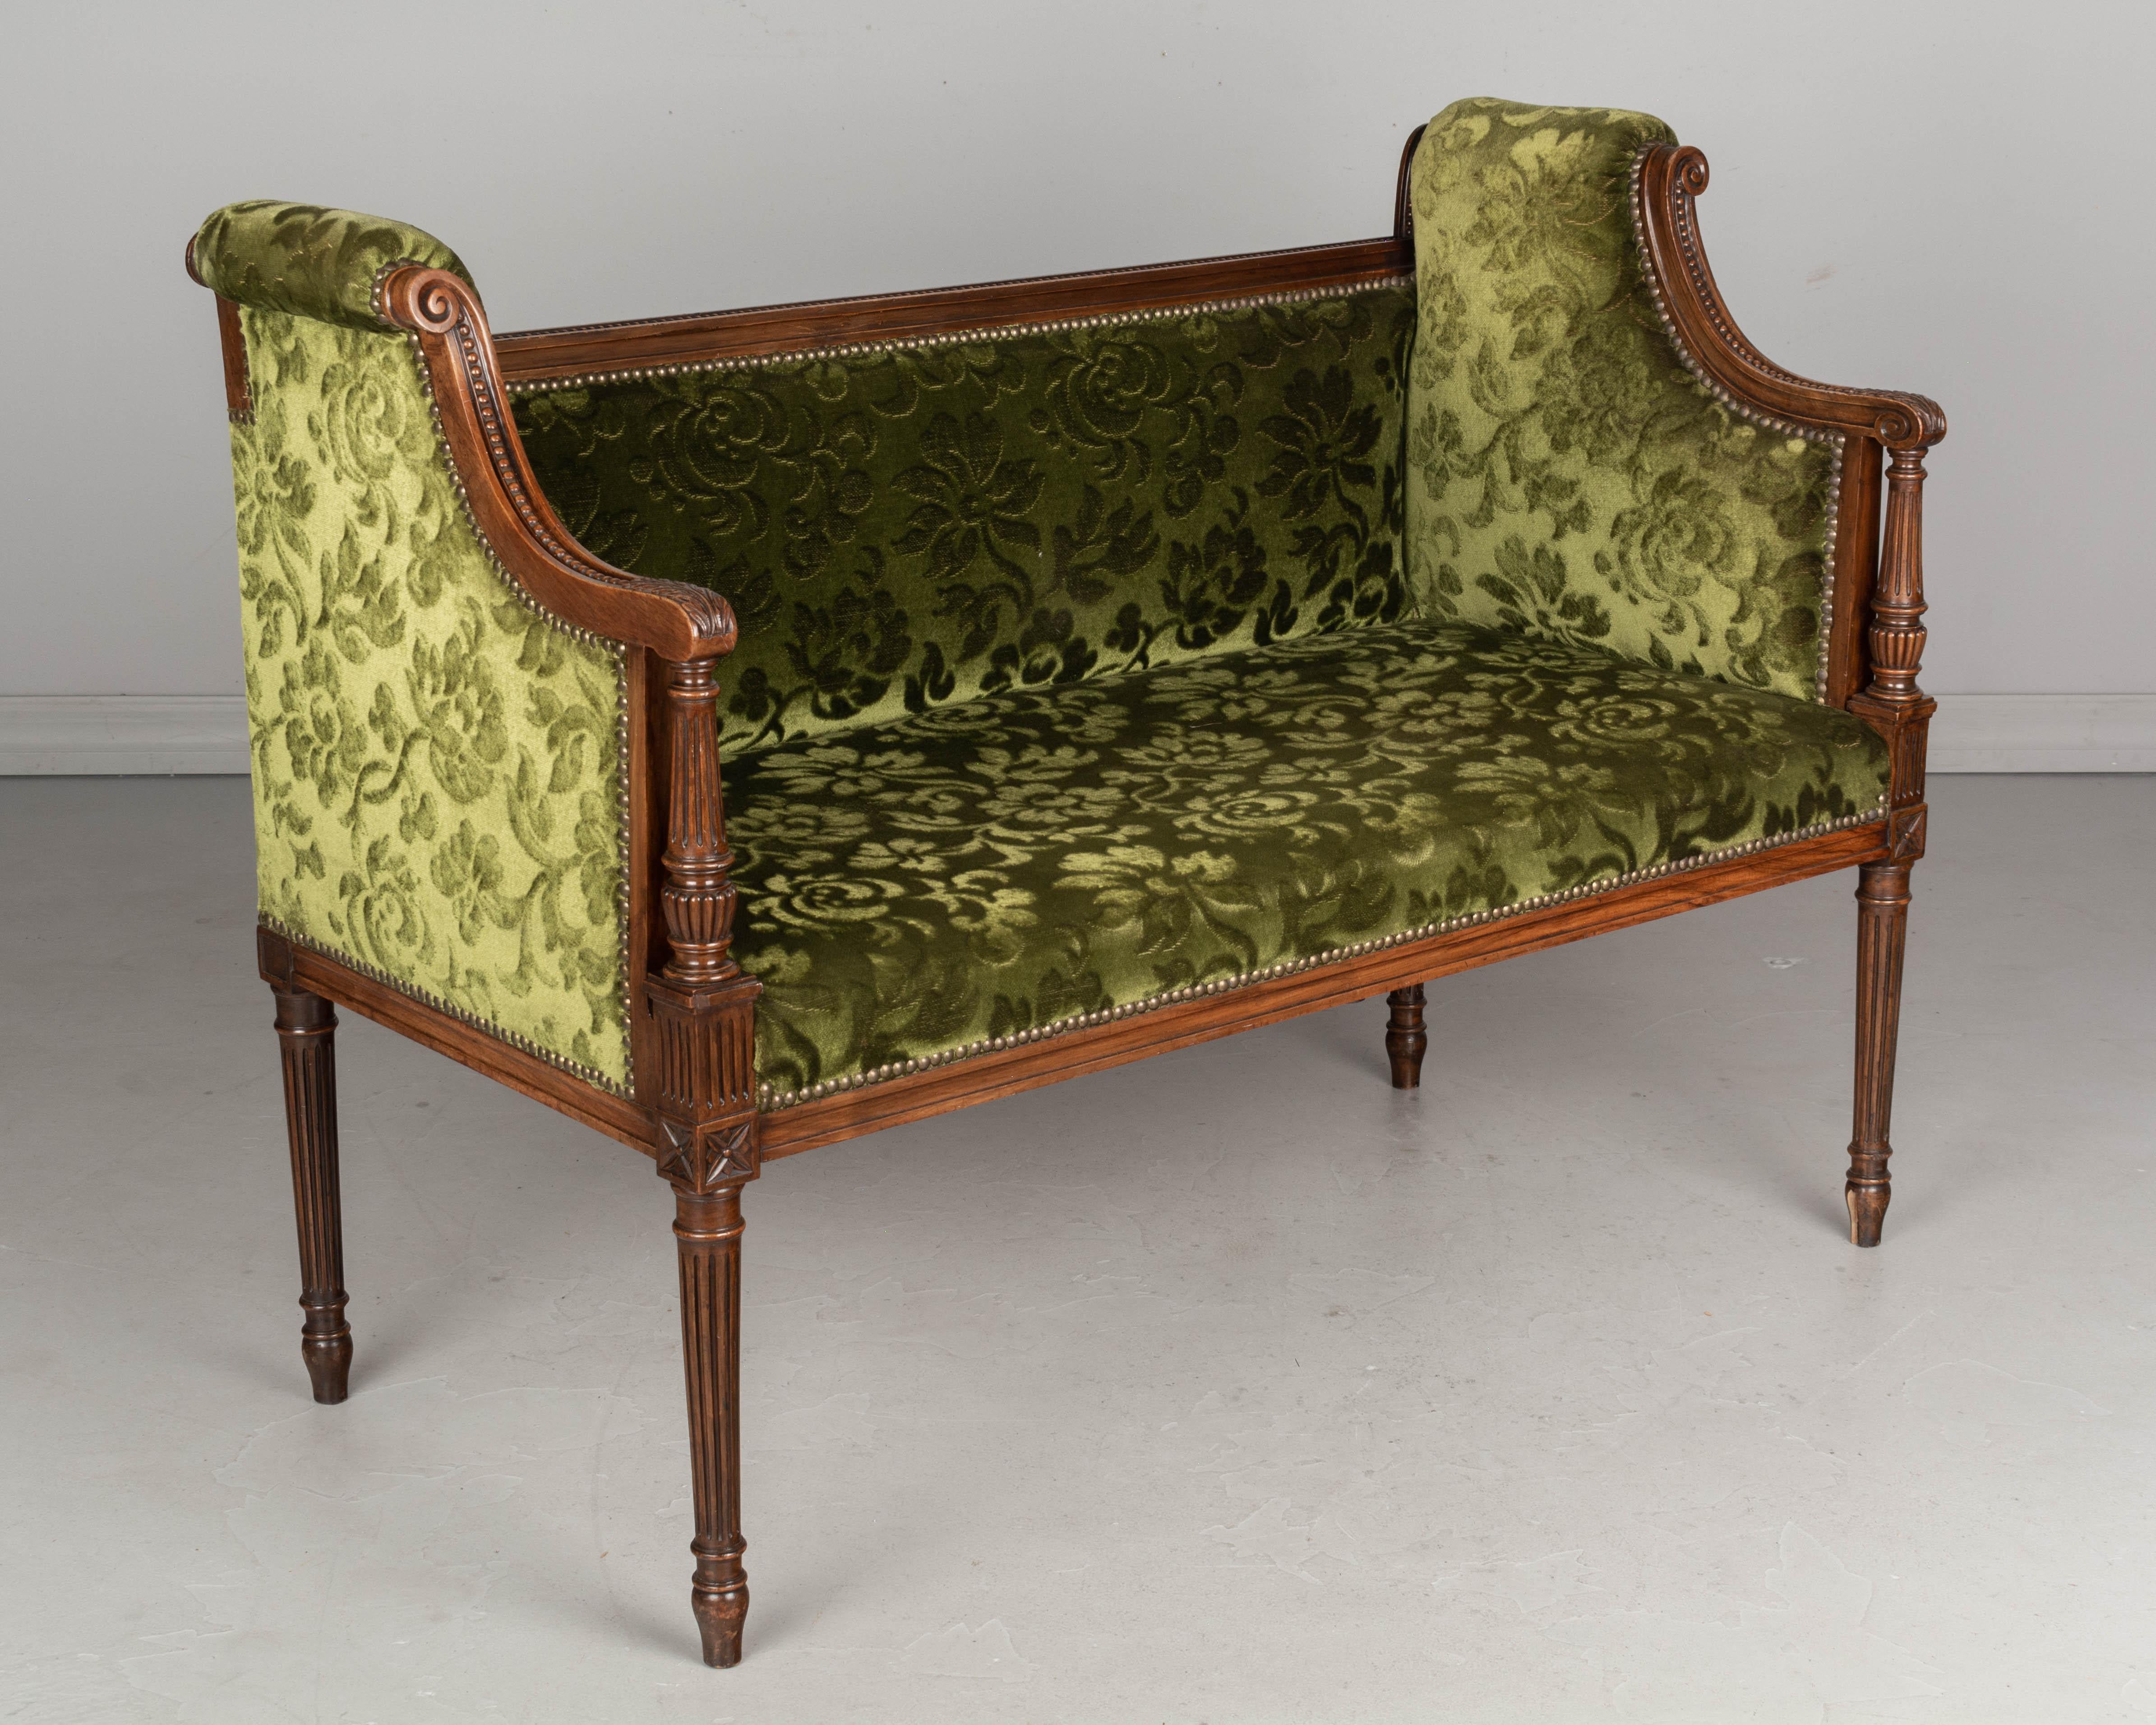 A Louis XVI style small banquette or bench with walnut frame. Good proportions and nice carved details including fluted legs and columns and sloped arms with scrolls. Old green velvet brocade upholstery is in serviceable condition. Circa 1900-1910.